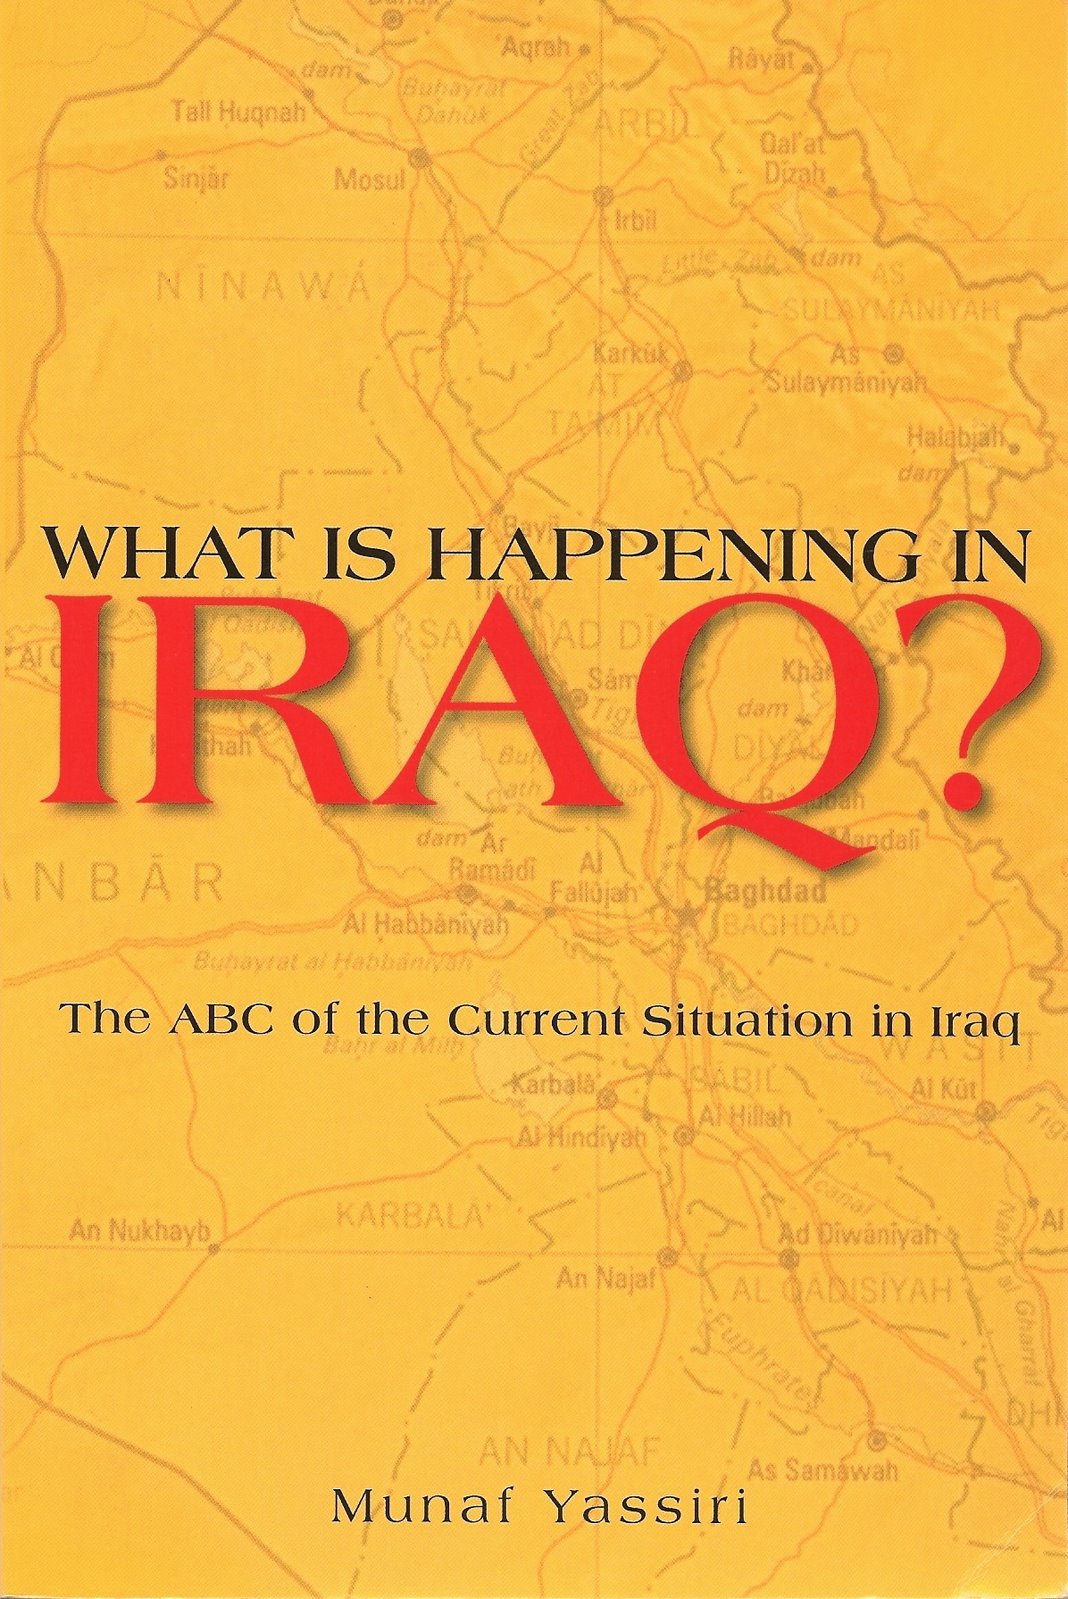 [What+is+happening+in+Iraq.jpg]